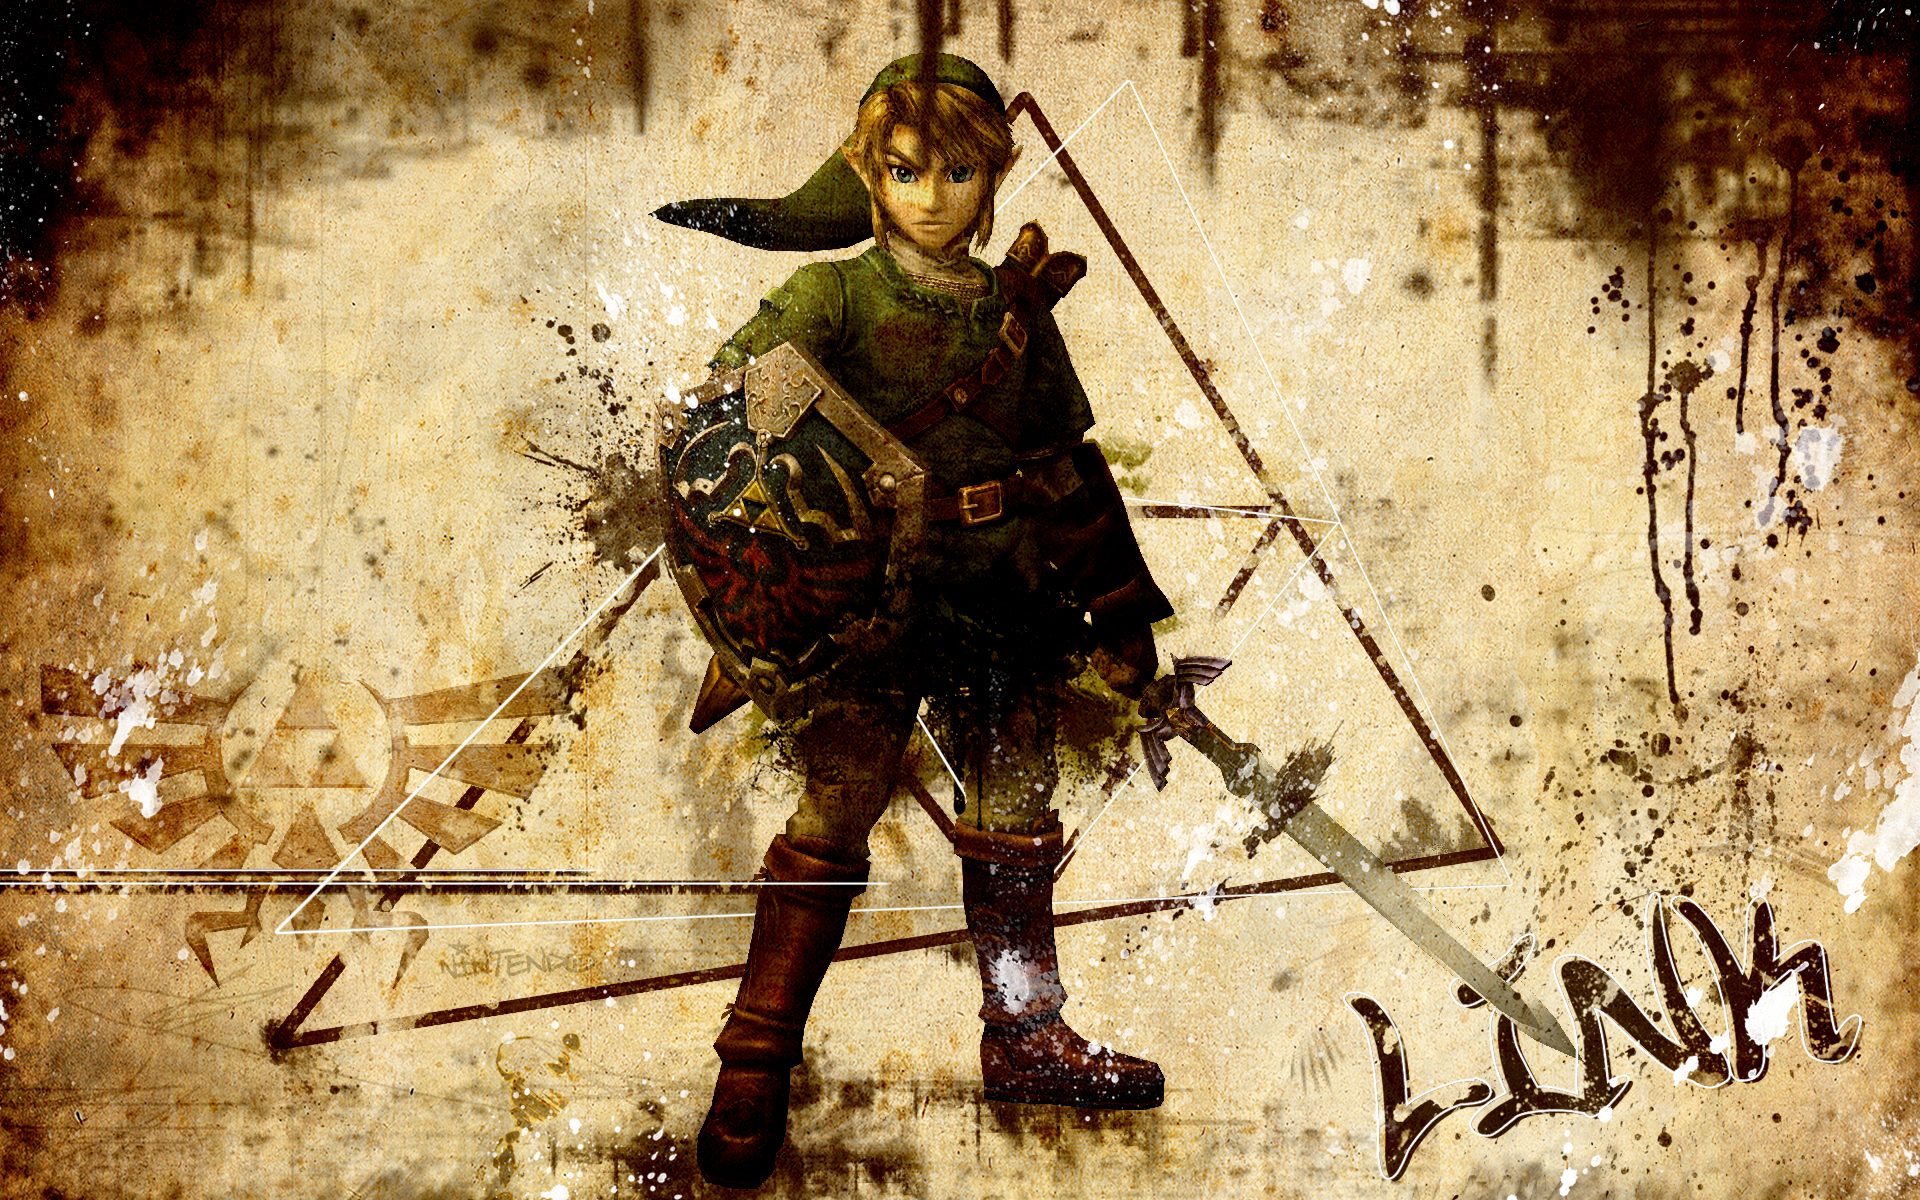 Fantasy elf warrior with a shield and sword HD wallpaper with grunge background and artistic elements.